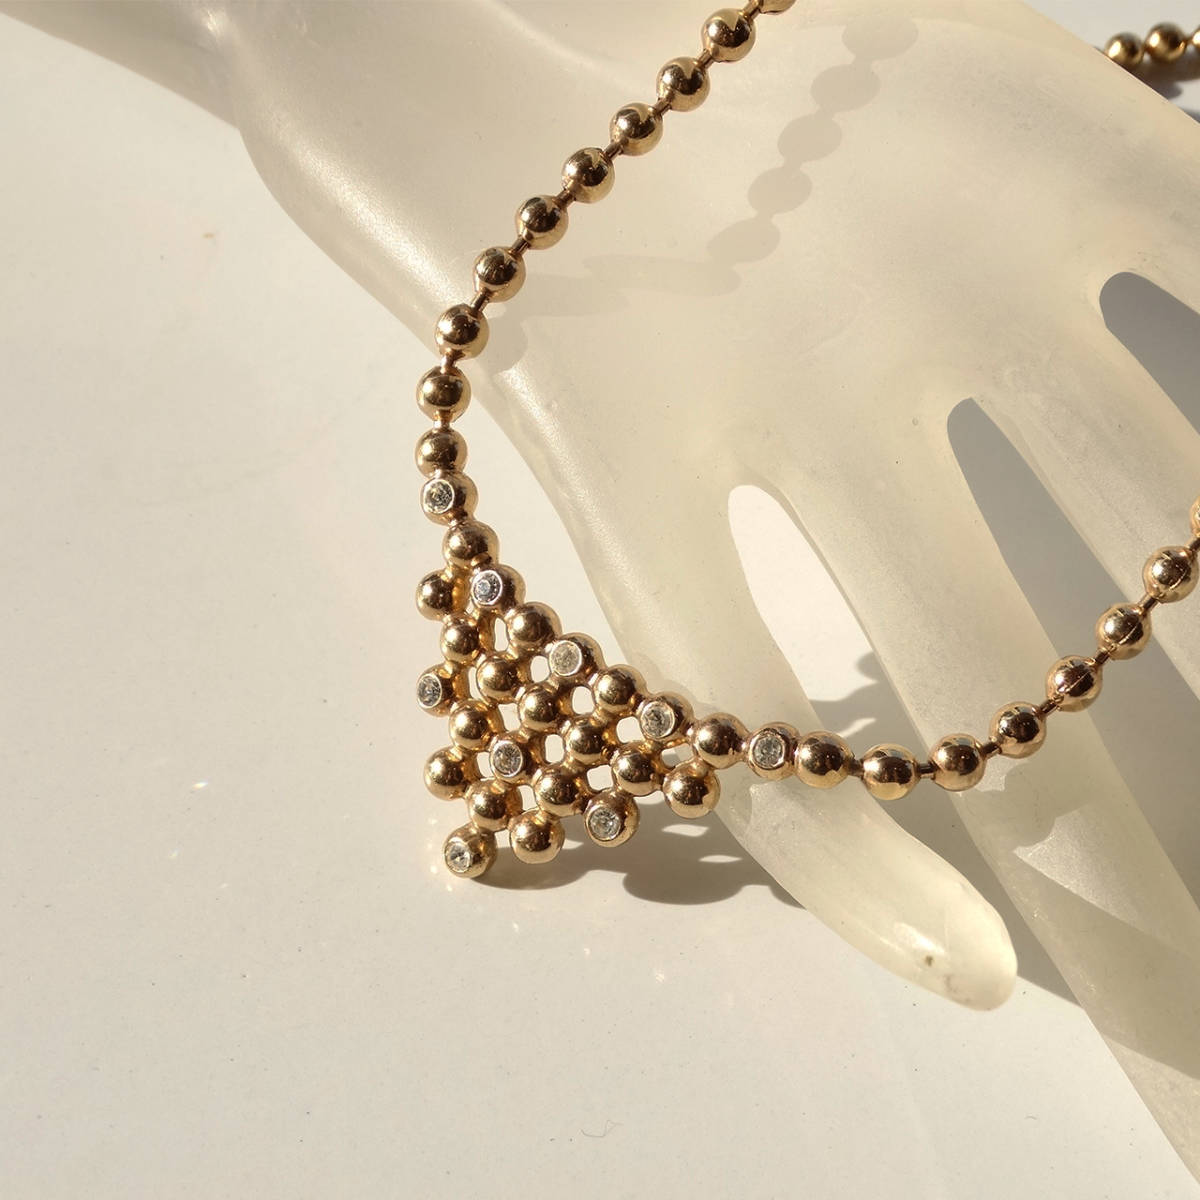 ★「Christian Dior」gold tone ball chain vintage necklace